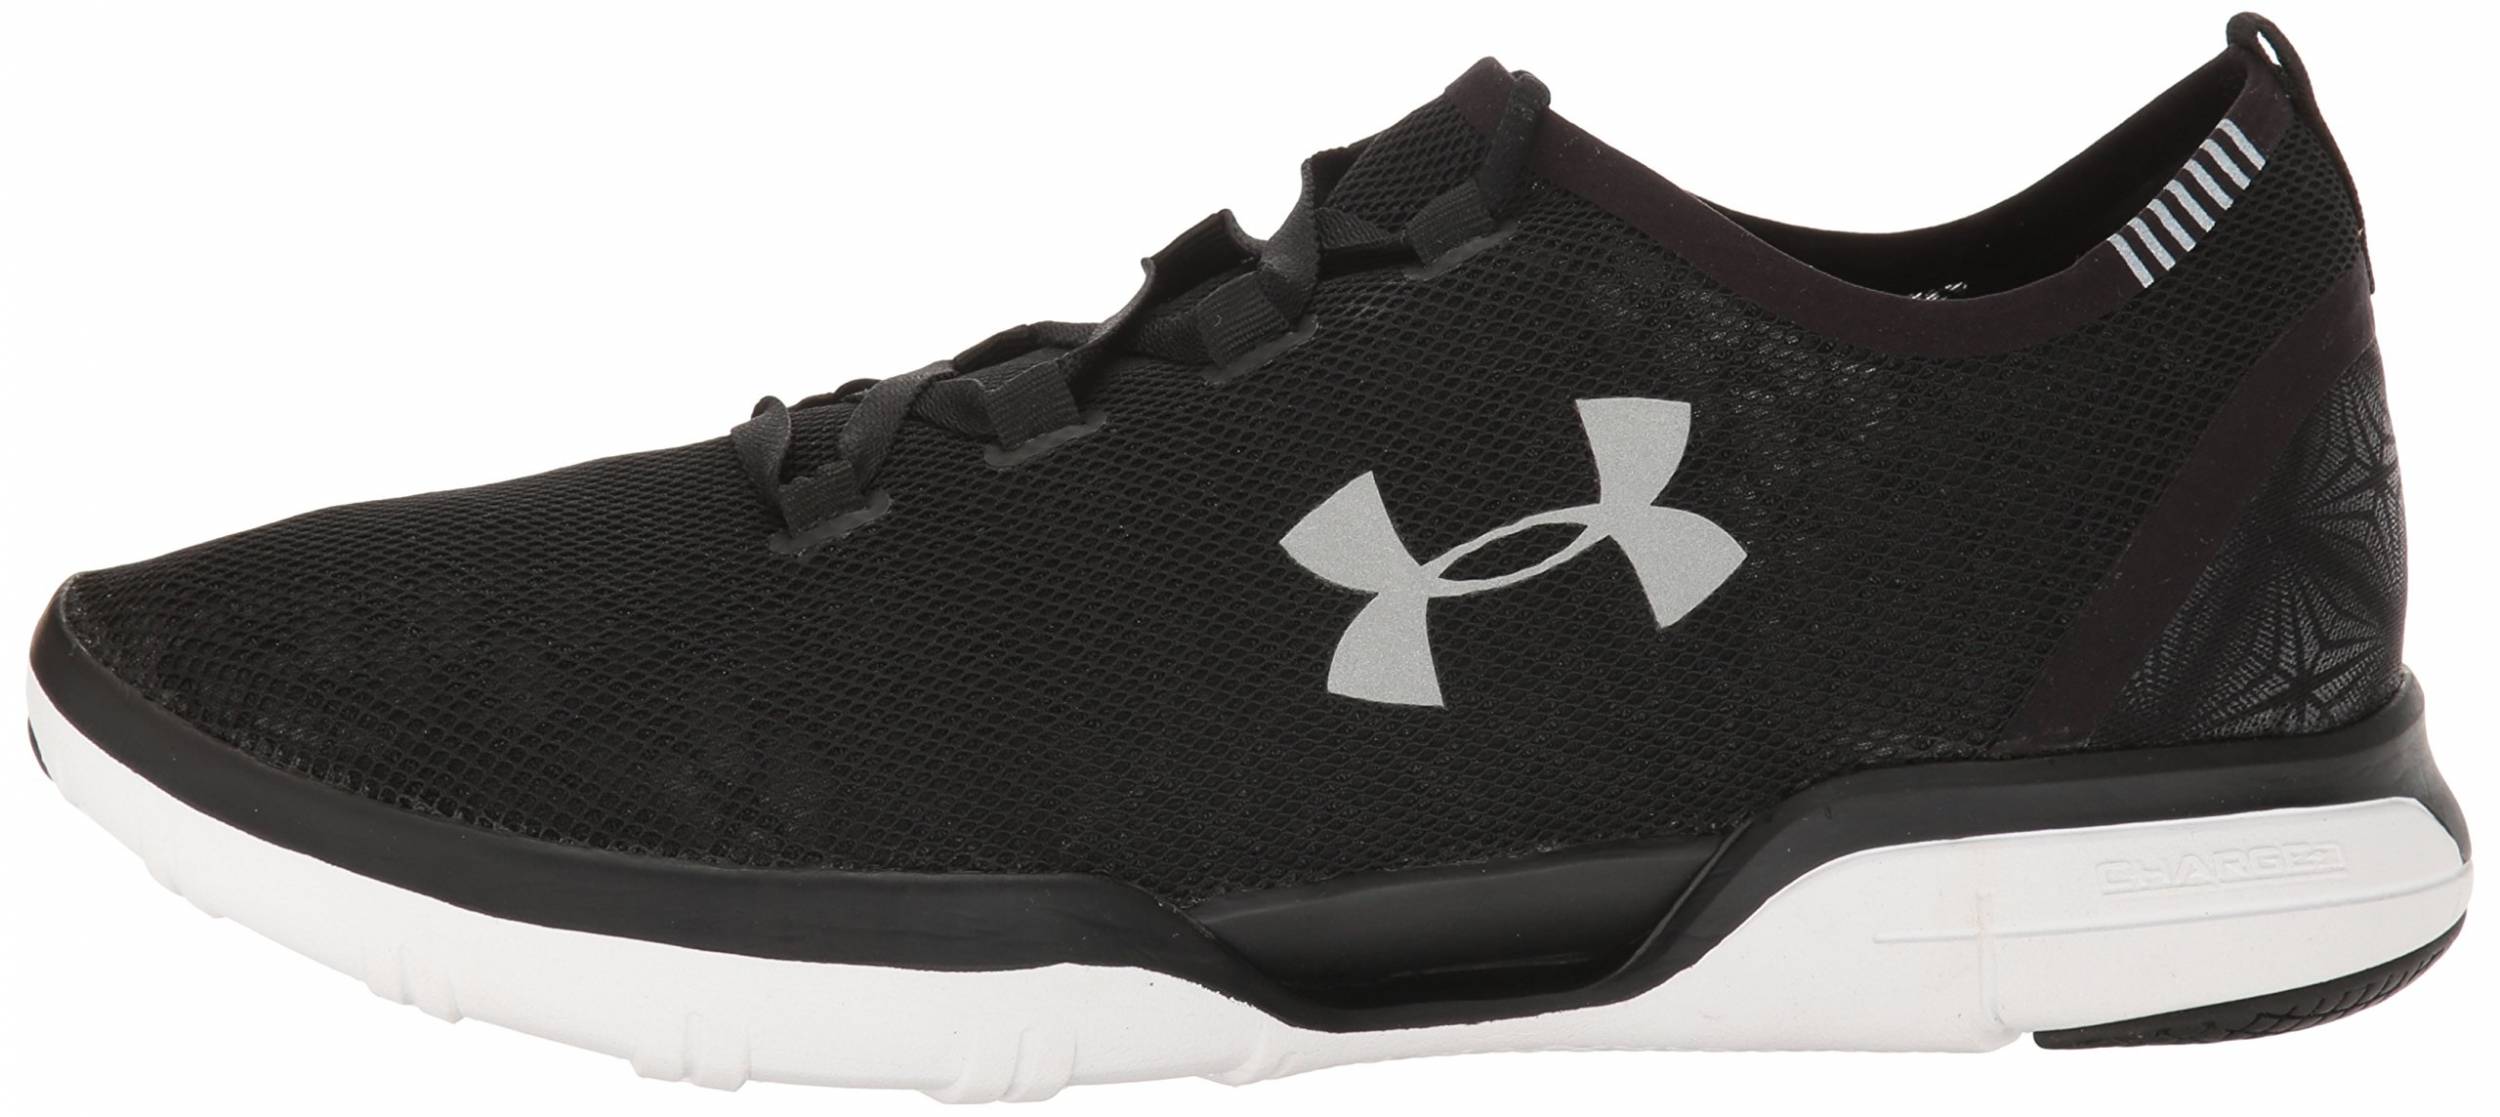 Under Armour Charged coolswitch RUN Chaussures Hommes Chaussures De Course Sneaker 1285666-001 